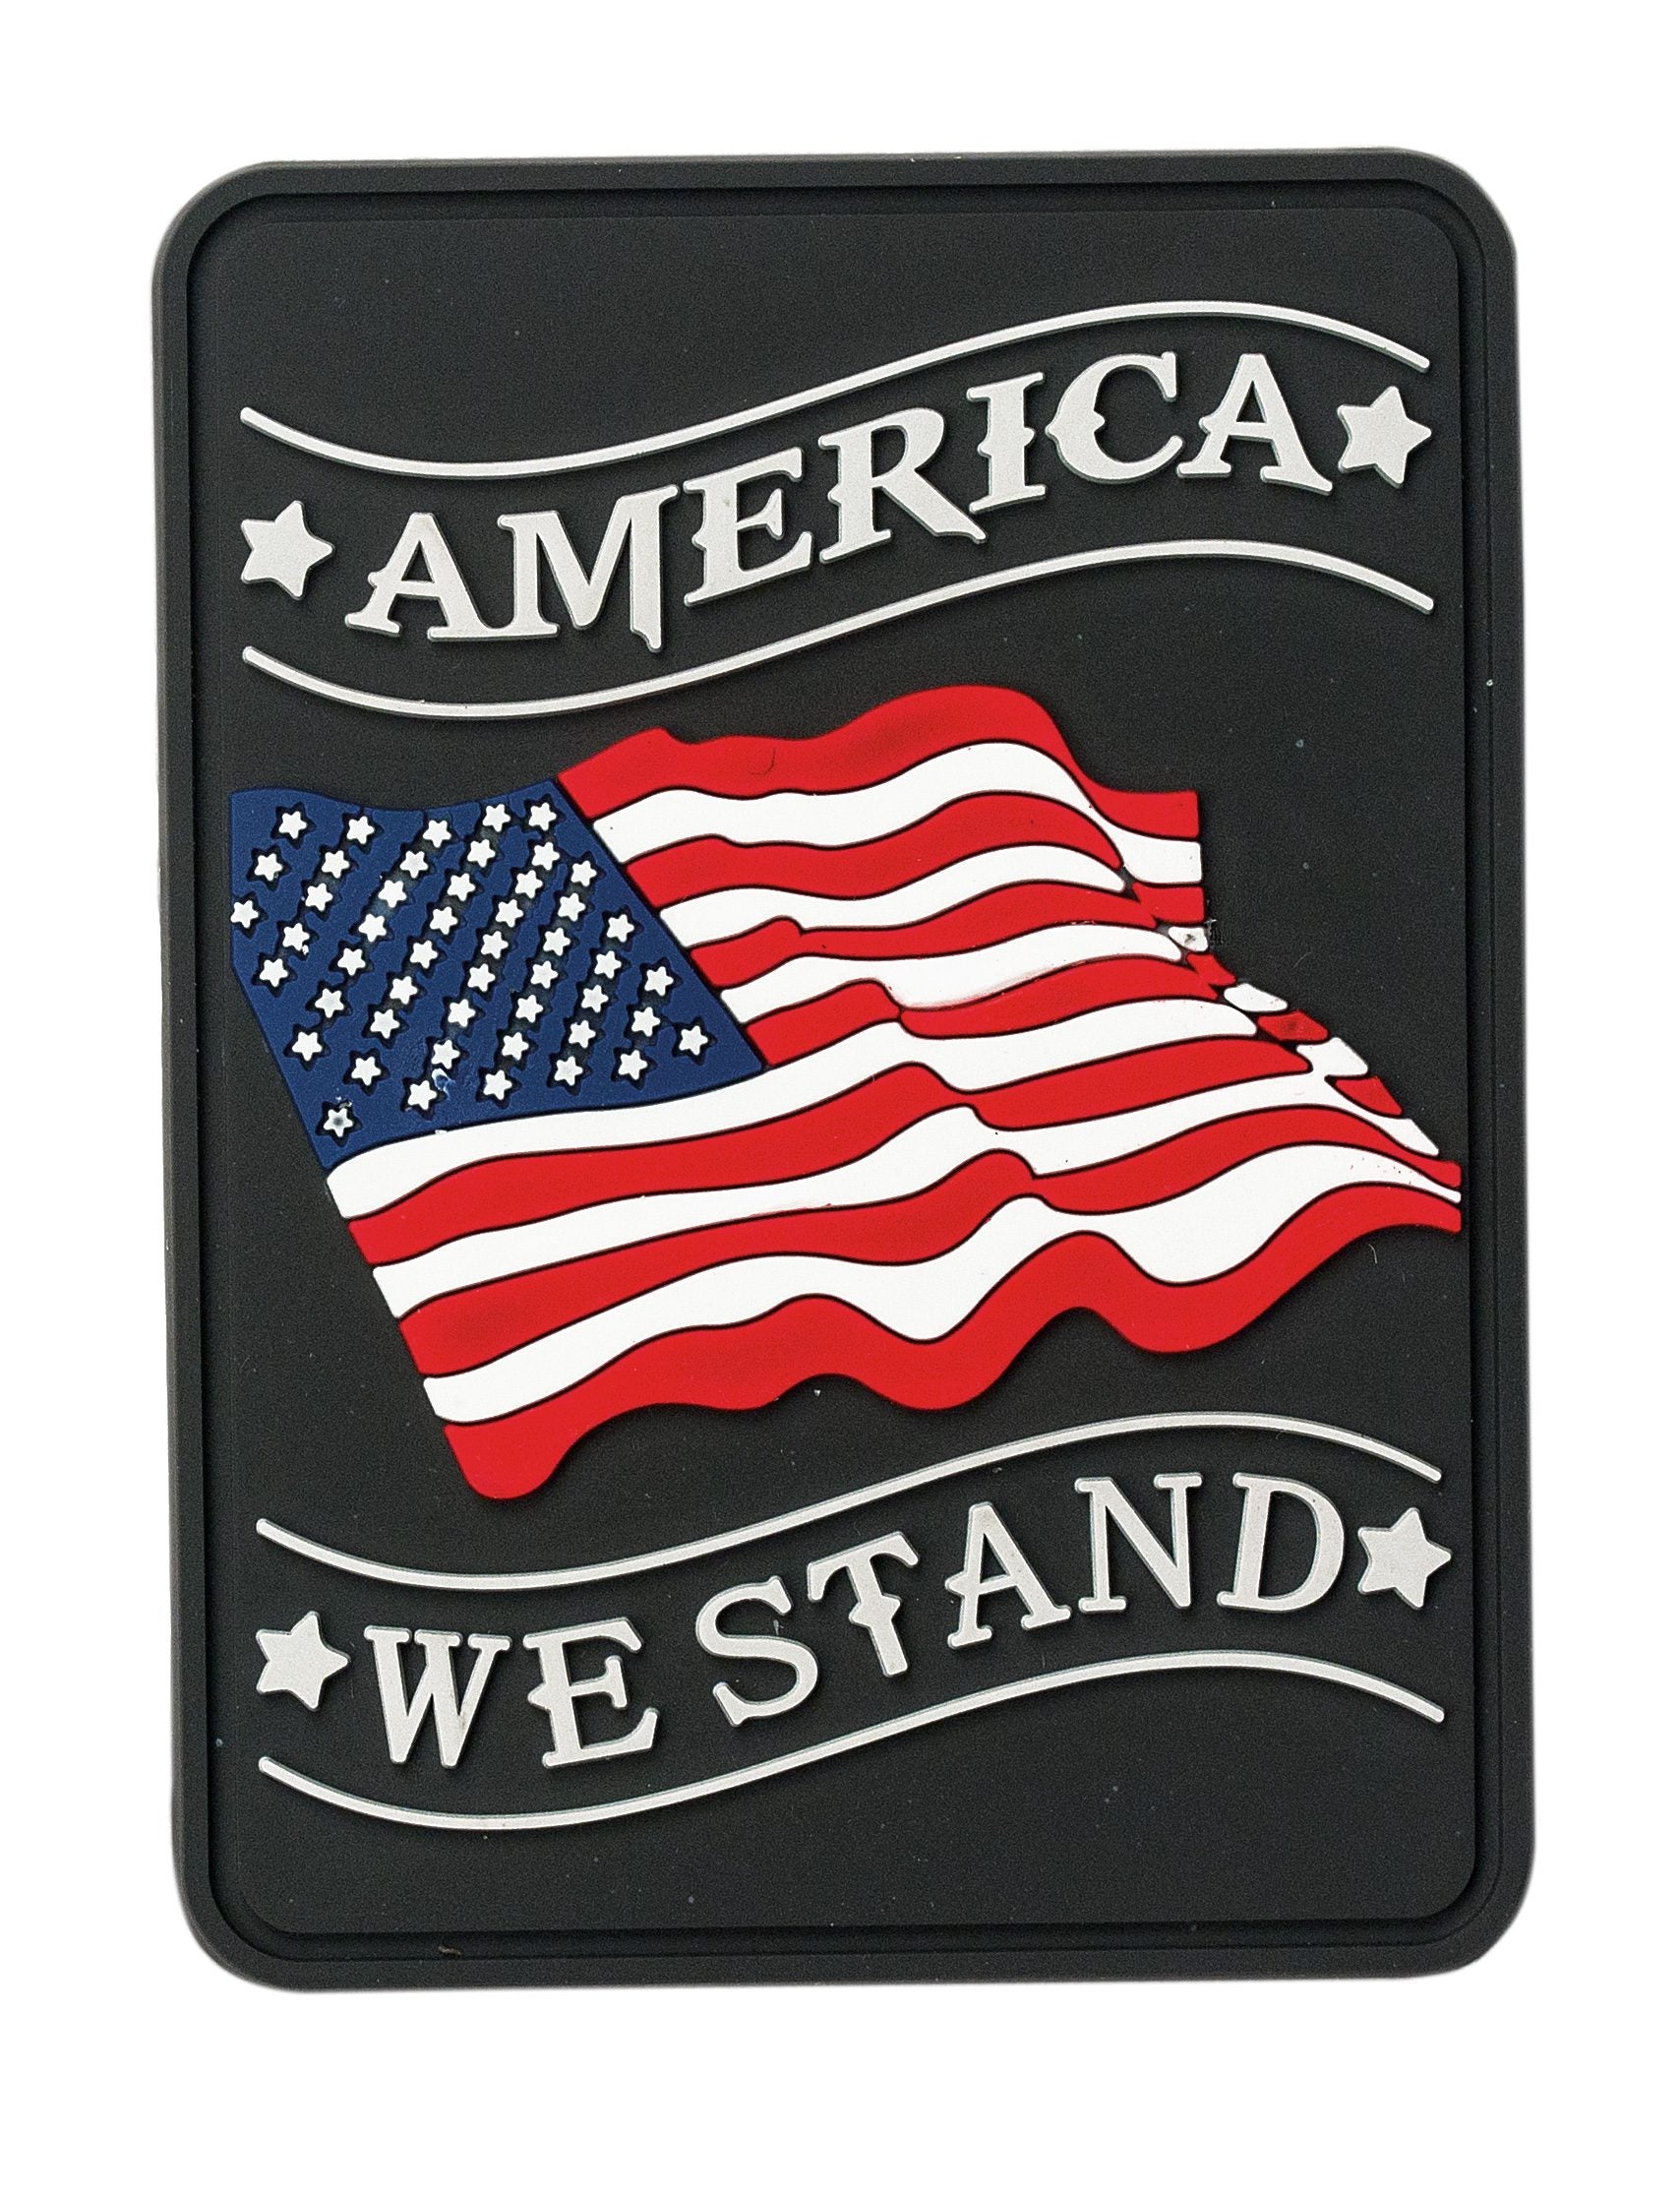 Voodoo Tactical Rubber Patch - America We Stand 07-0984 - Morale Patches